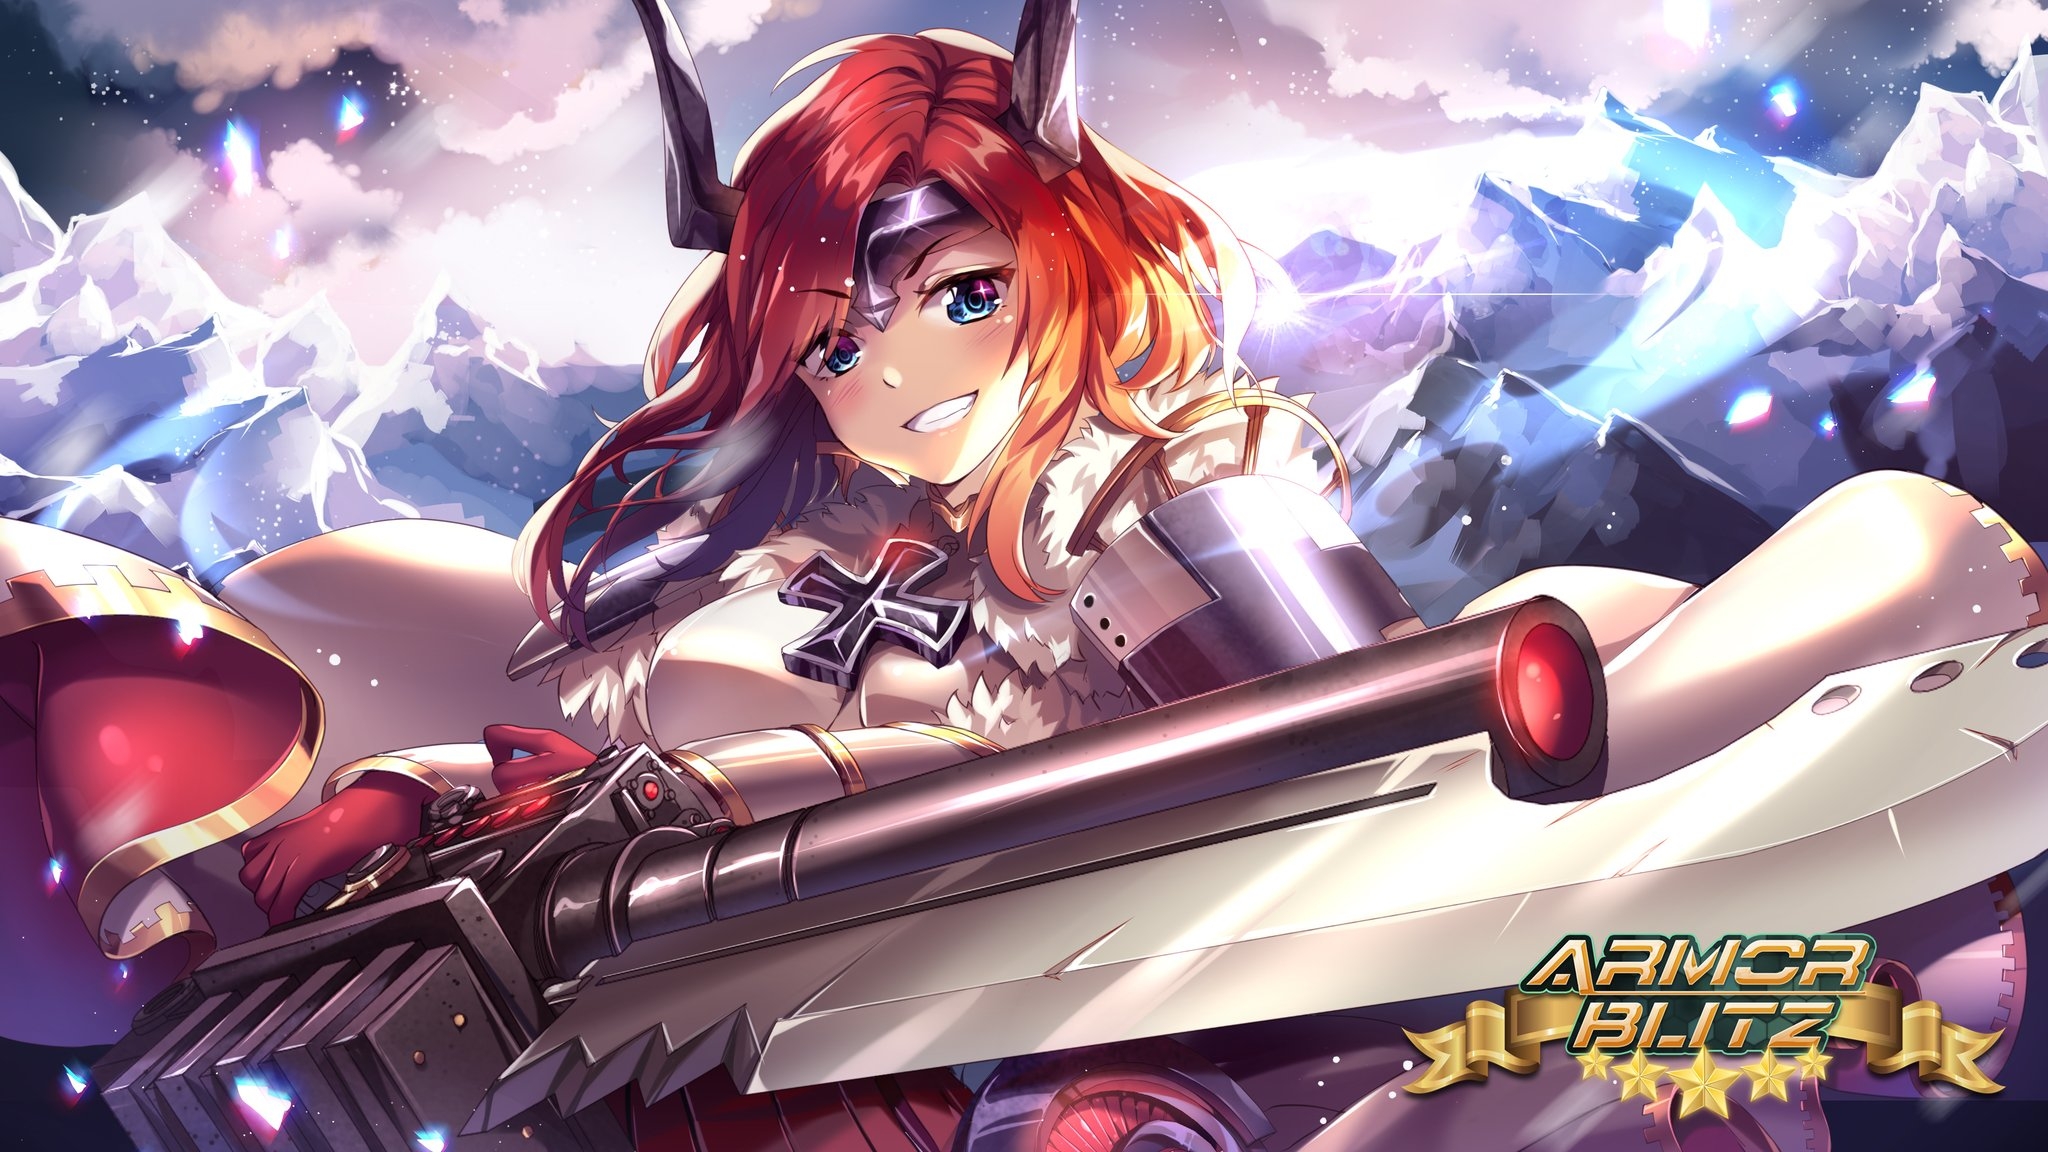 Photo free armour blitz and the girl smiling, anime and games, anime